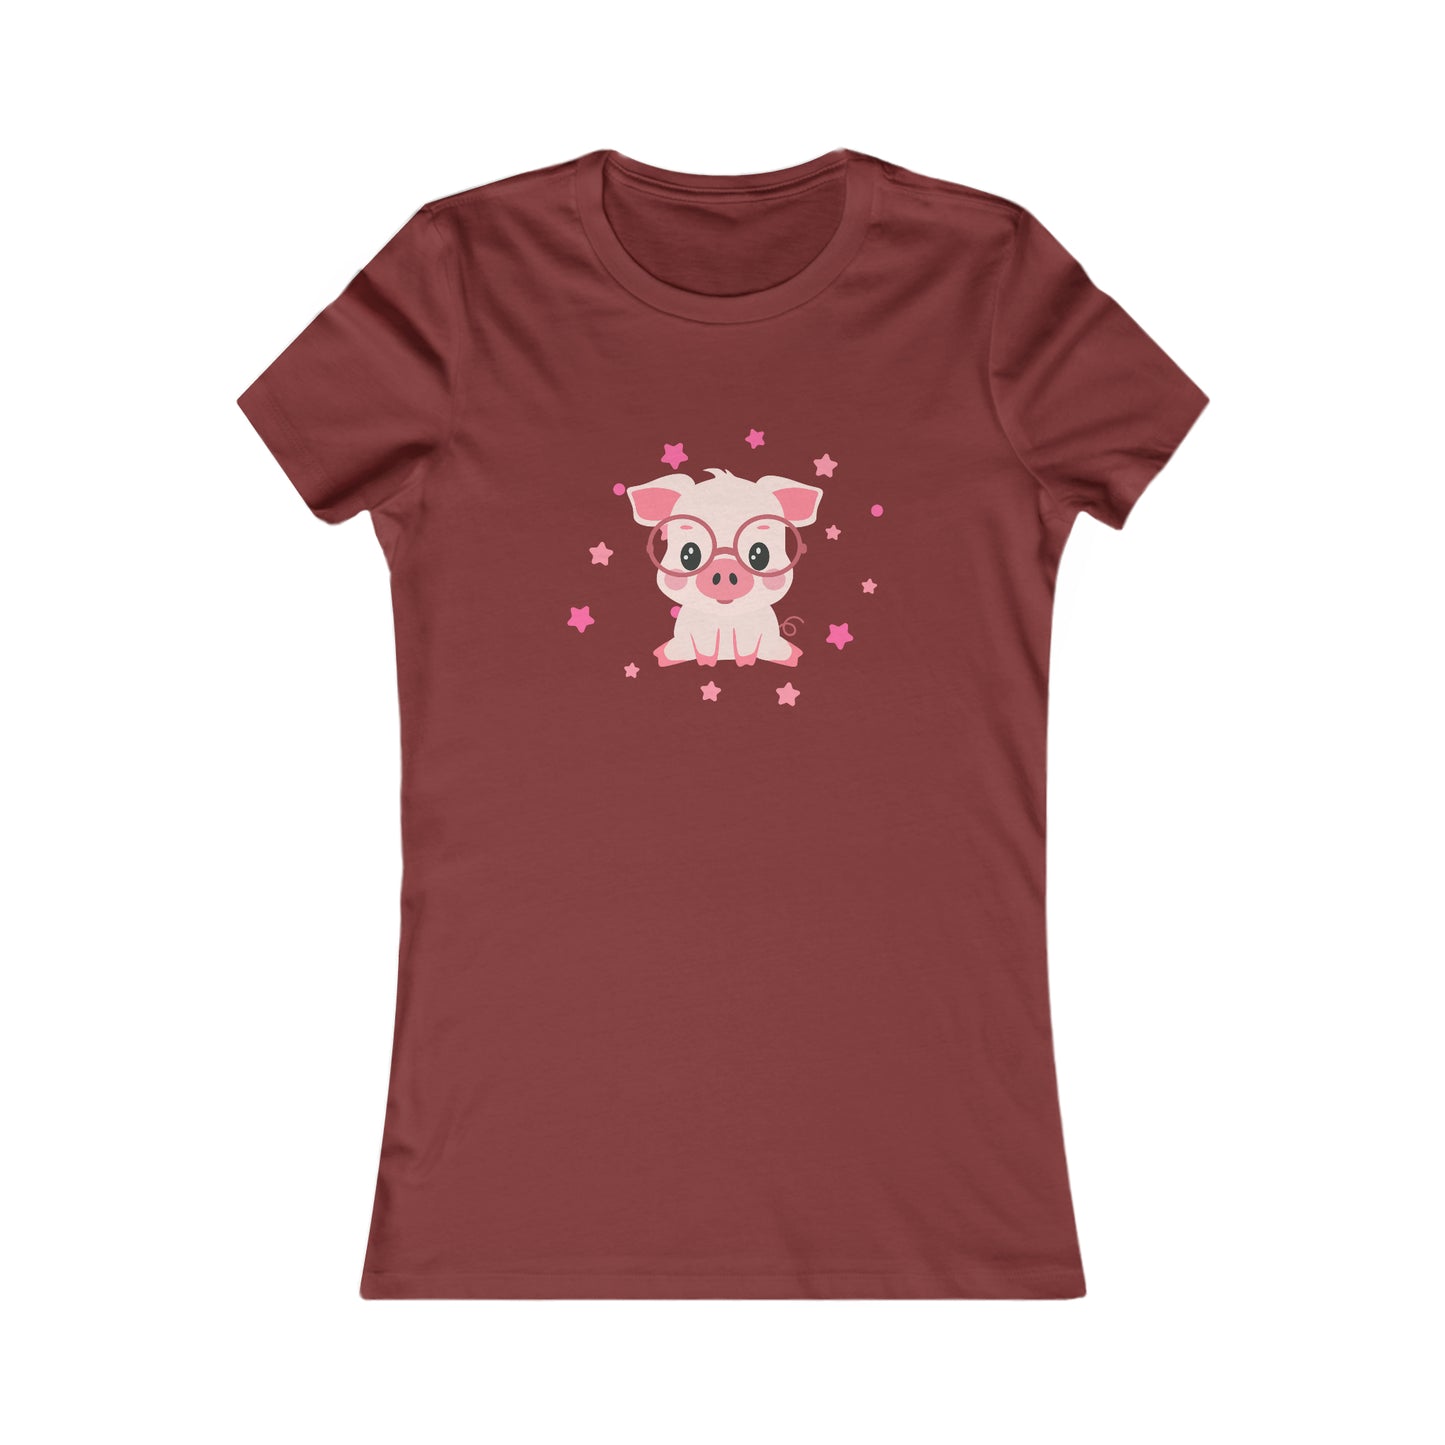 A very cute little pig is the center of this Women's Favorite Tee design. Slim fit so please check the size table.